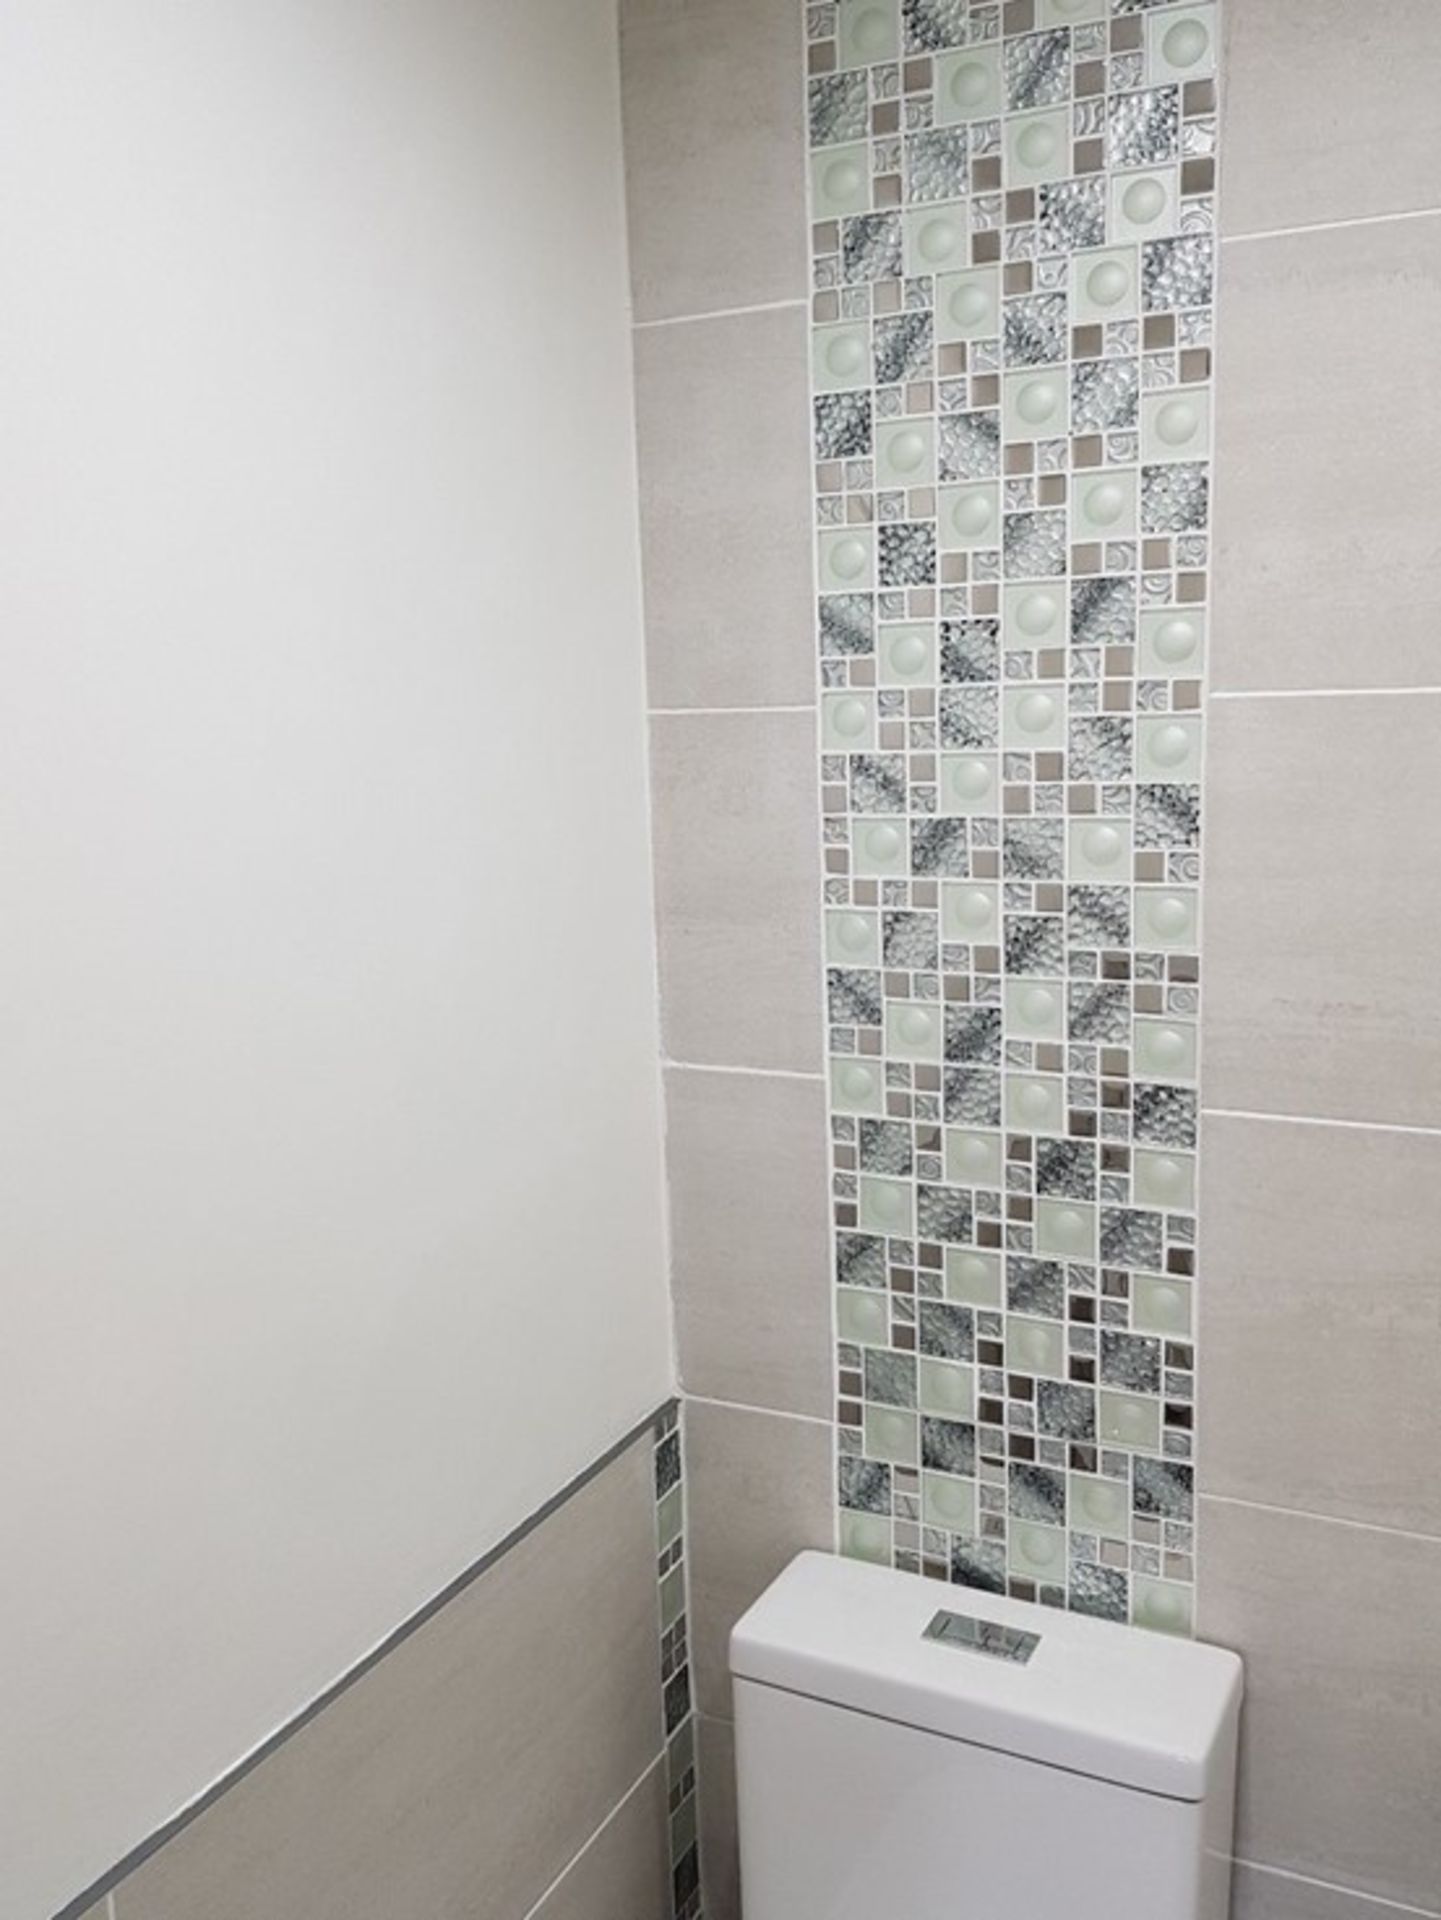 1 Pallet of 48 SQM (528 Sheets) Stock Clearance High Quality Glass Mosaic Tiles *PLUS VAT* - Image 4 of 6